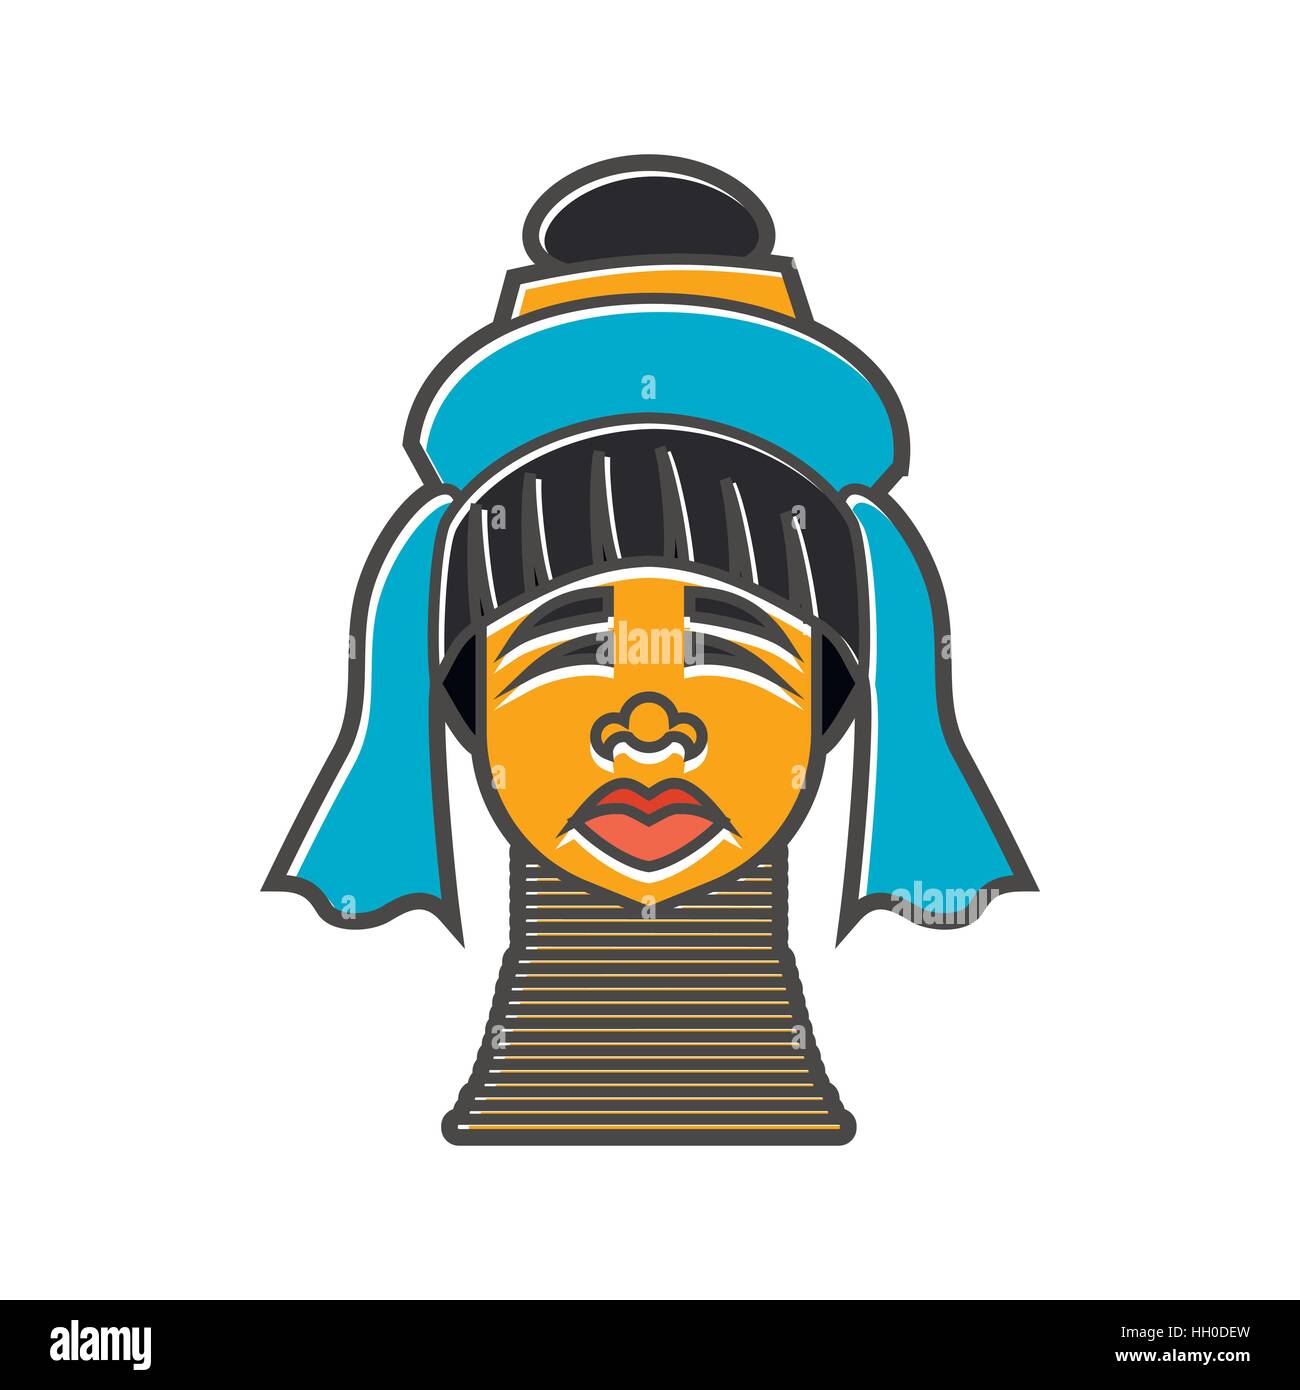 Karen long neck woman with traditional coils icon Stock Vector